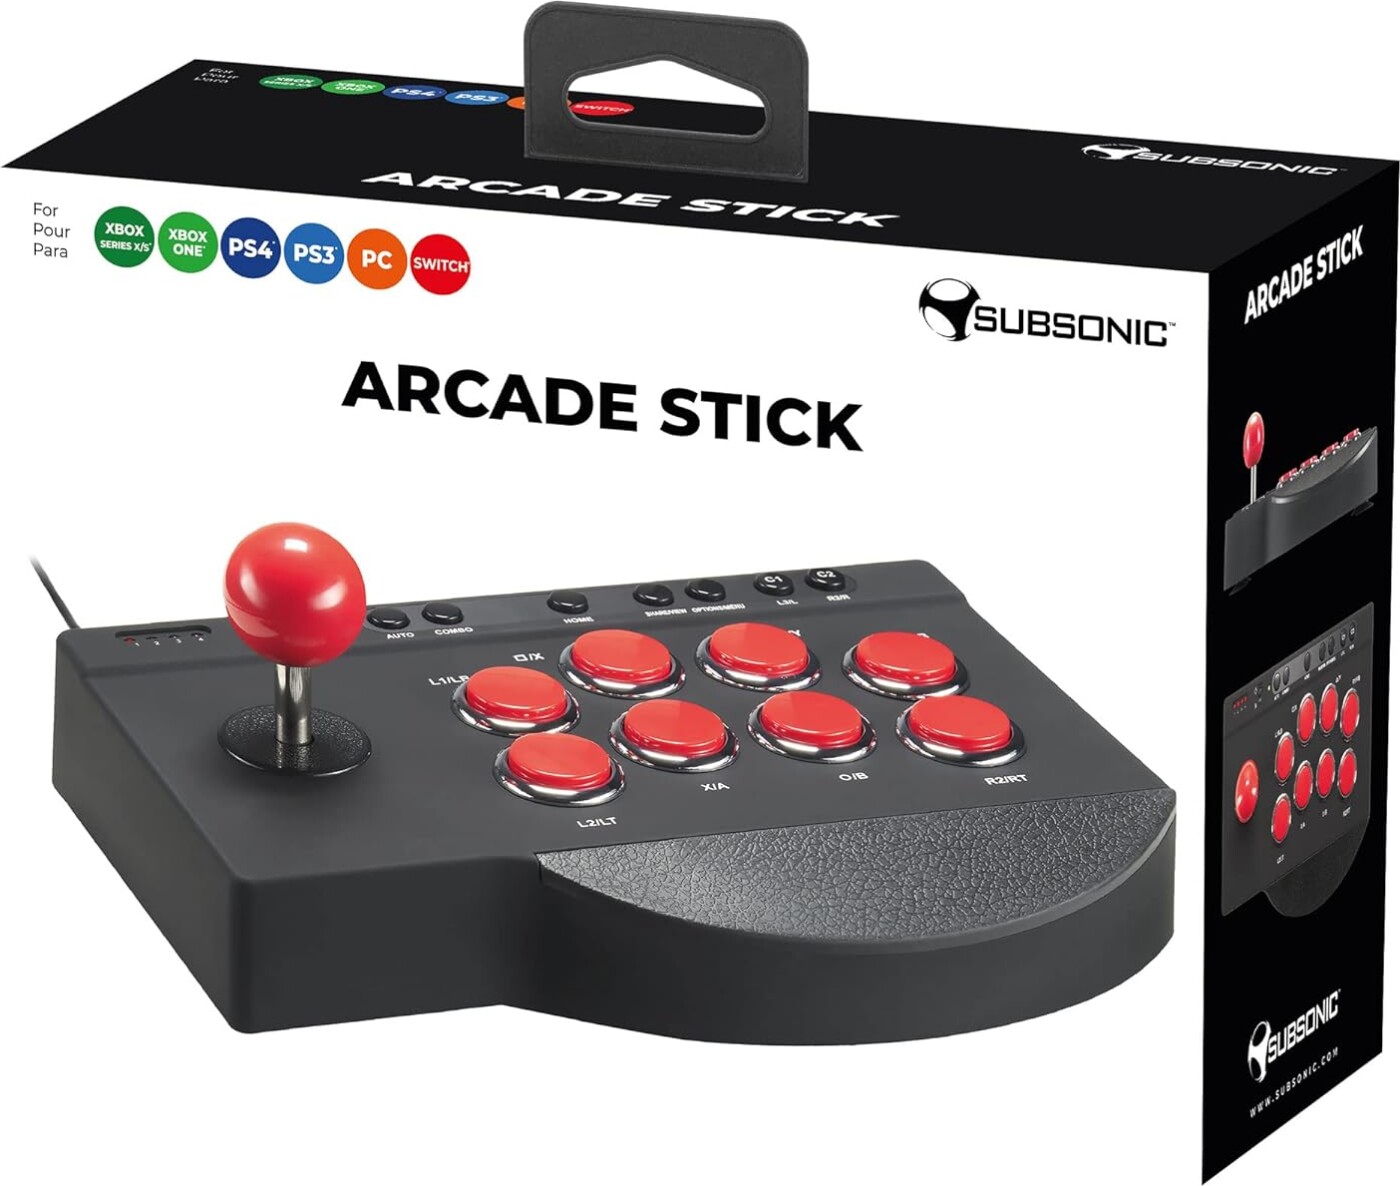 Subsonic Arcade Stick (ps4 /ps3 / Xbox / Pc / Switch)